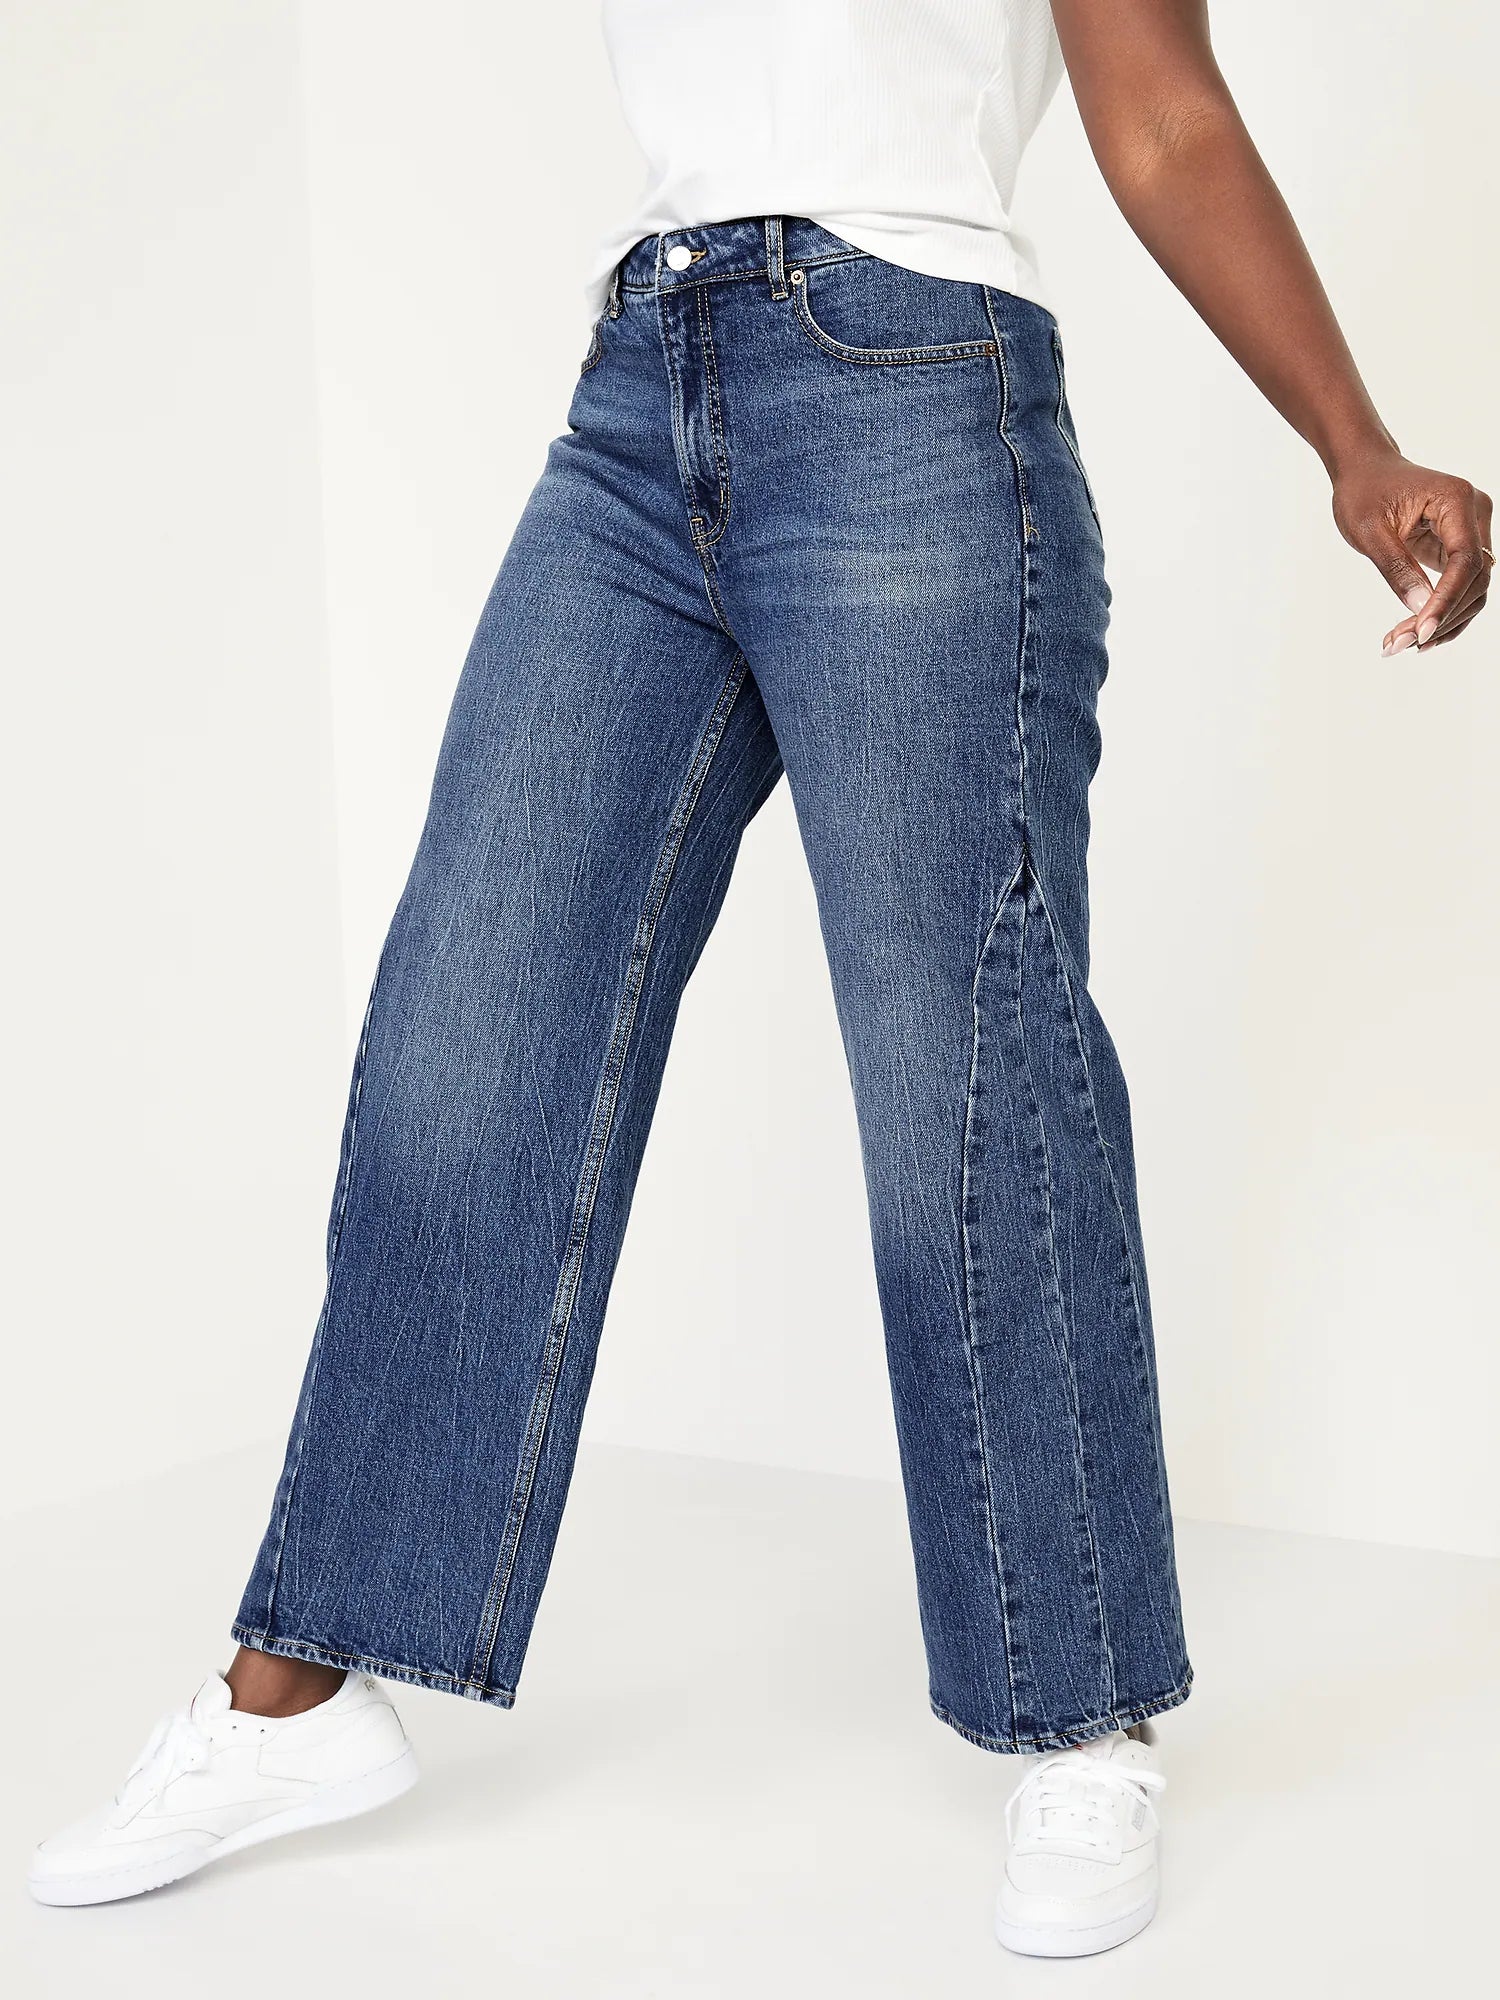 a model taking a step wearing the dark blue wide leg jeans with stitch detailing